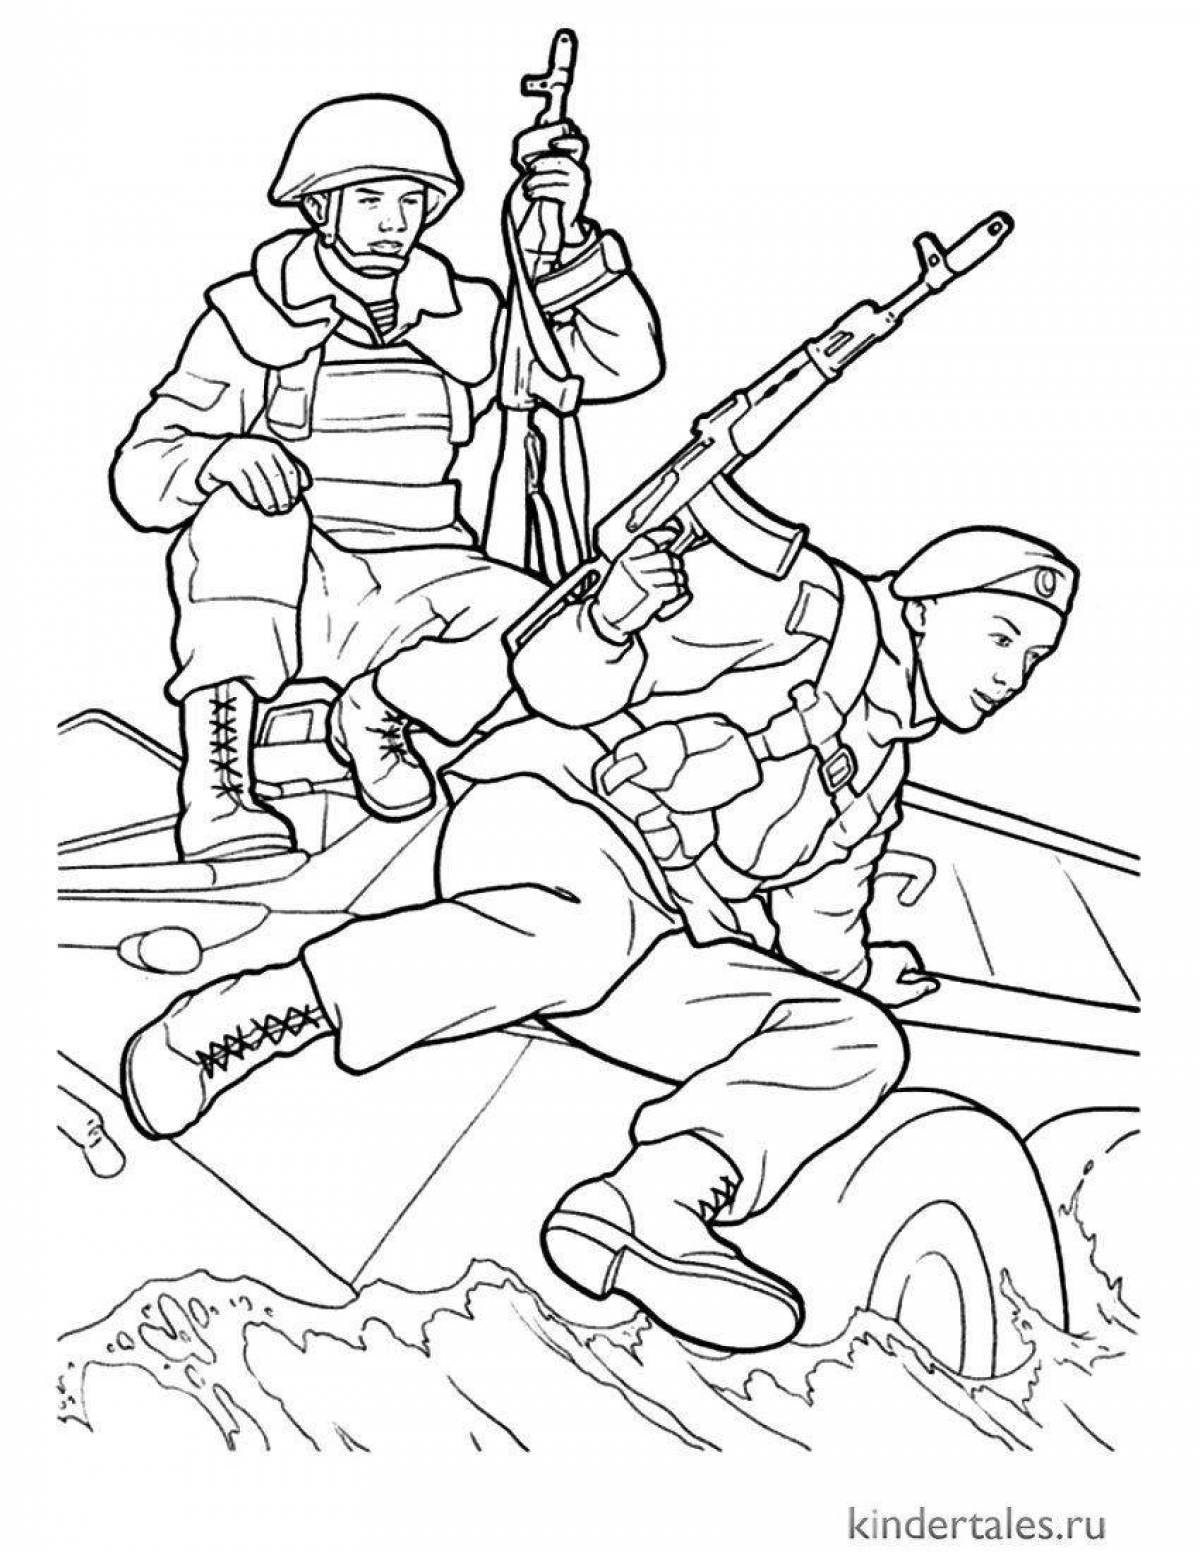 Coloring page luxury defenders of the fatherland